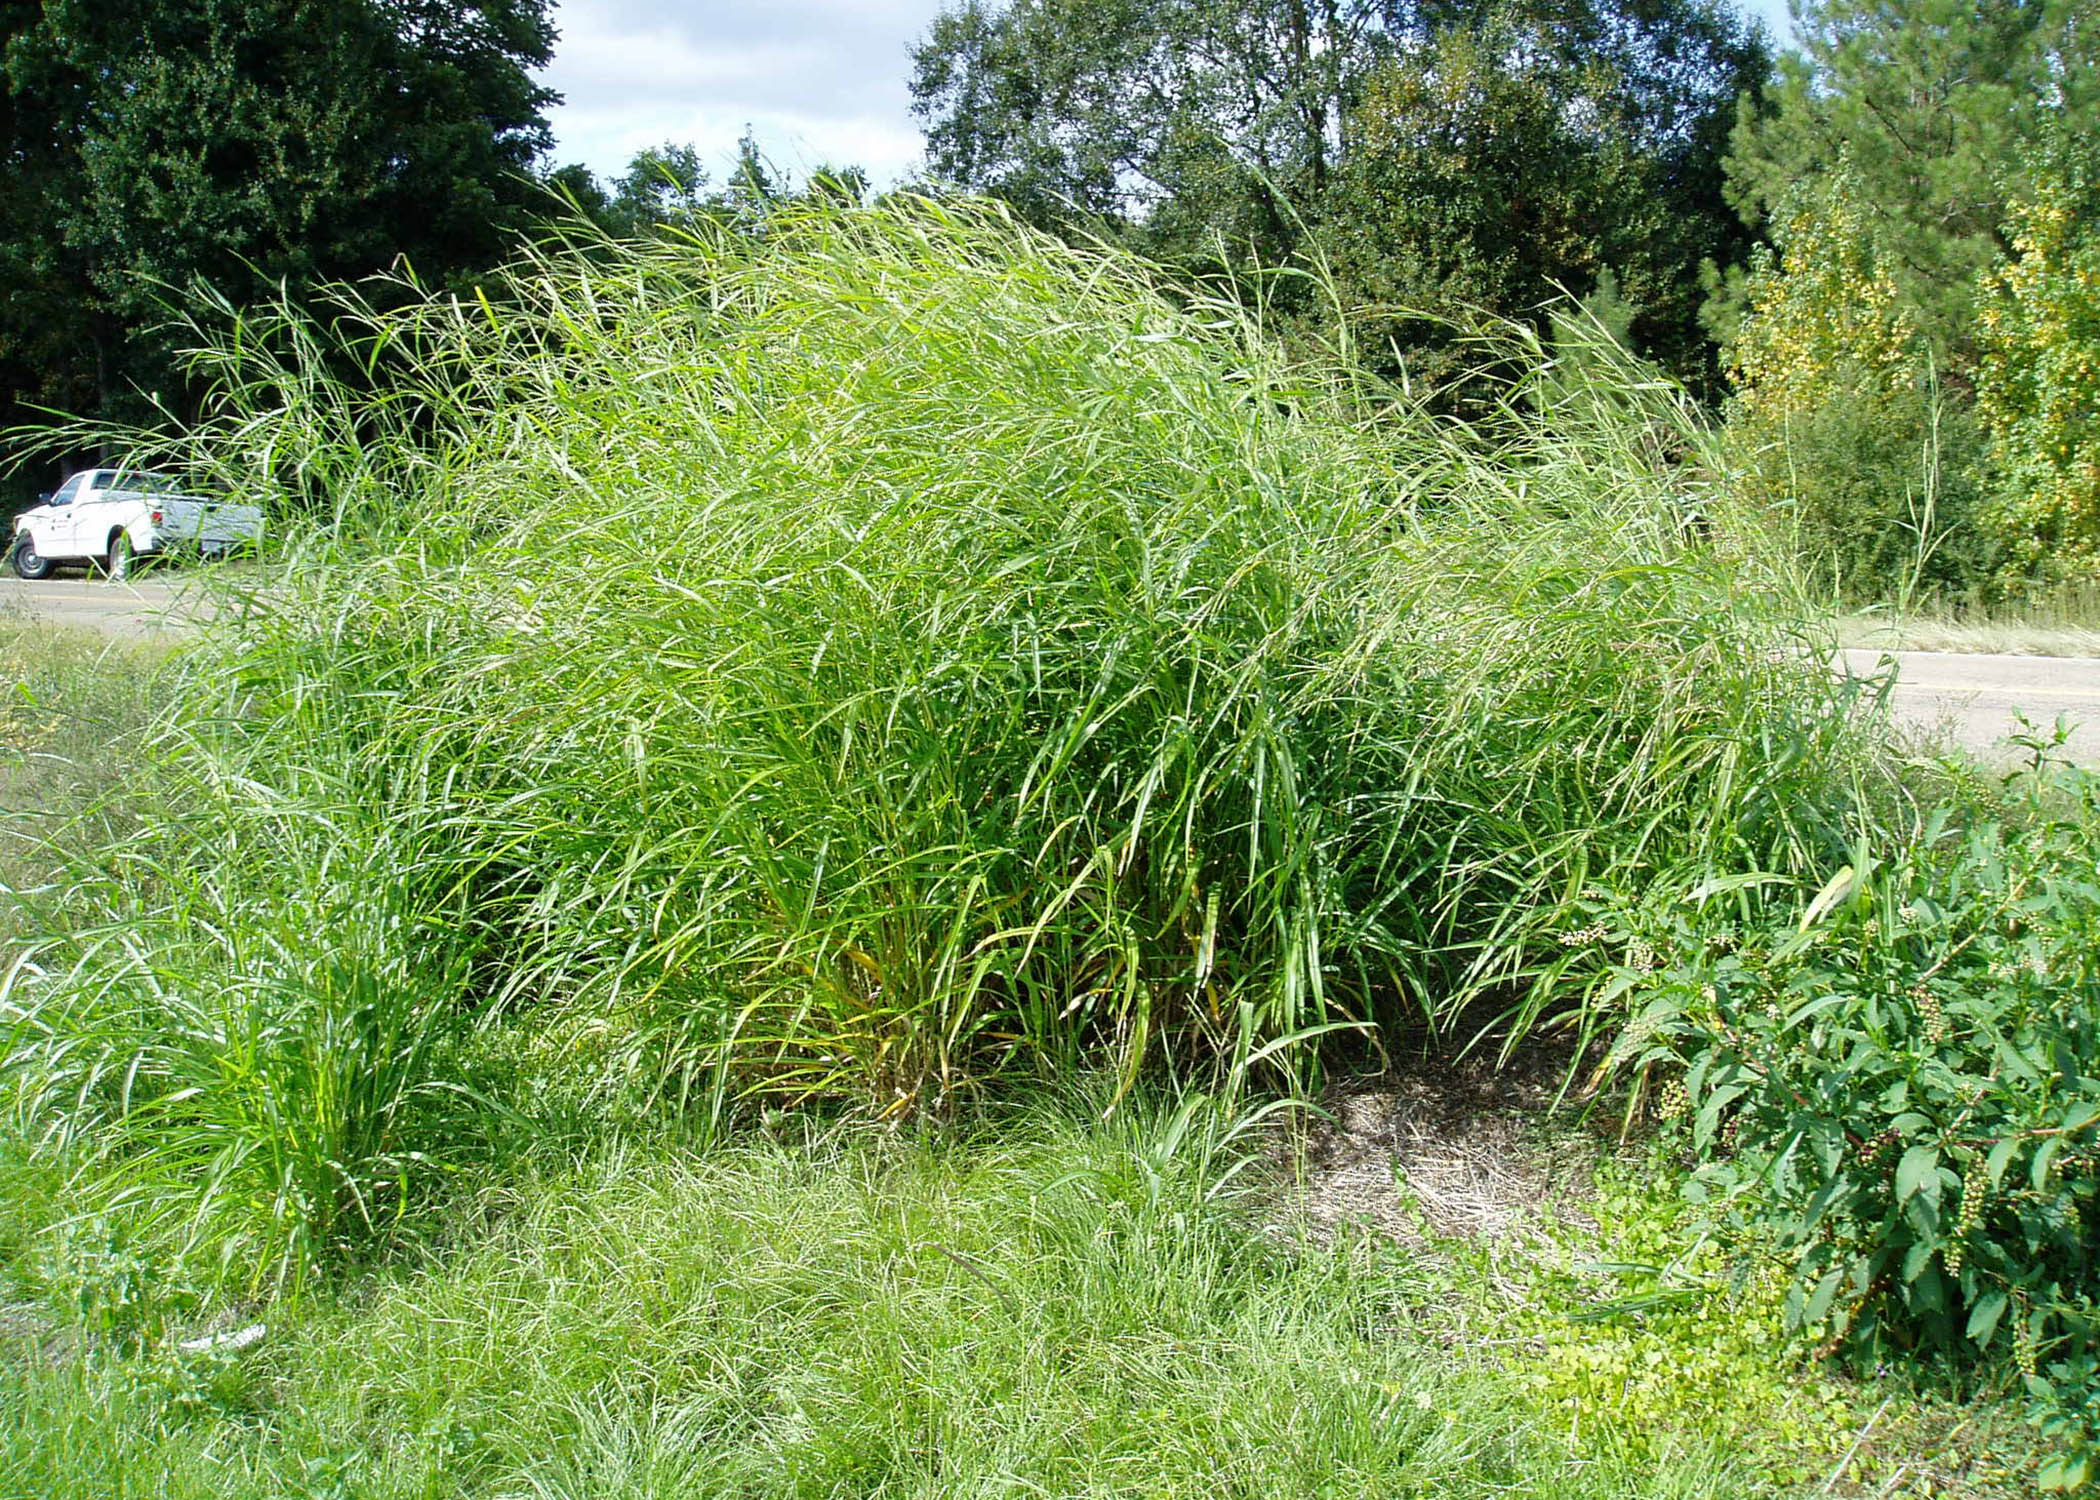 Example of itchgrass overtaking native species and obstructing visibility on a roadside.